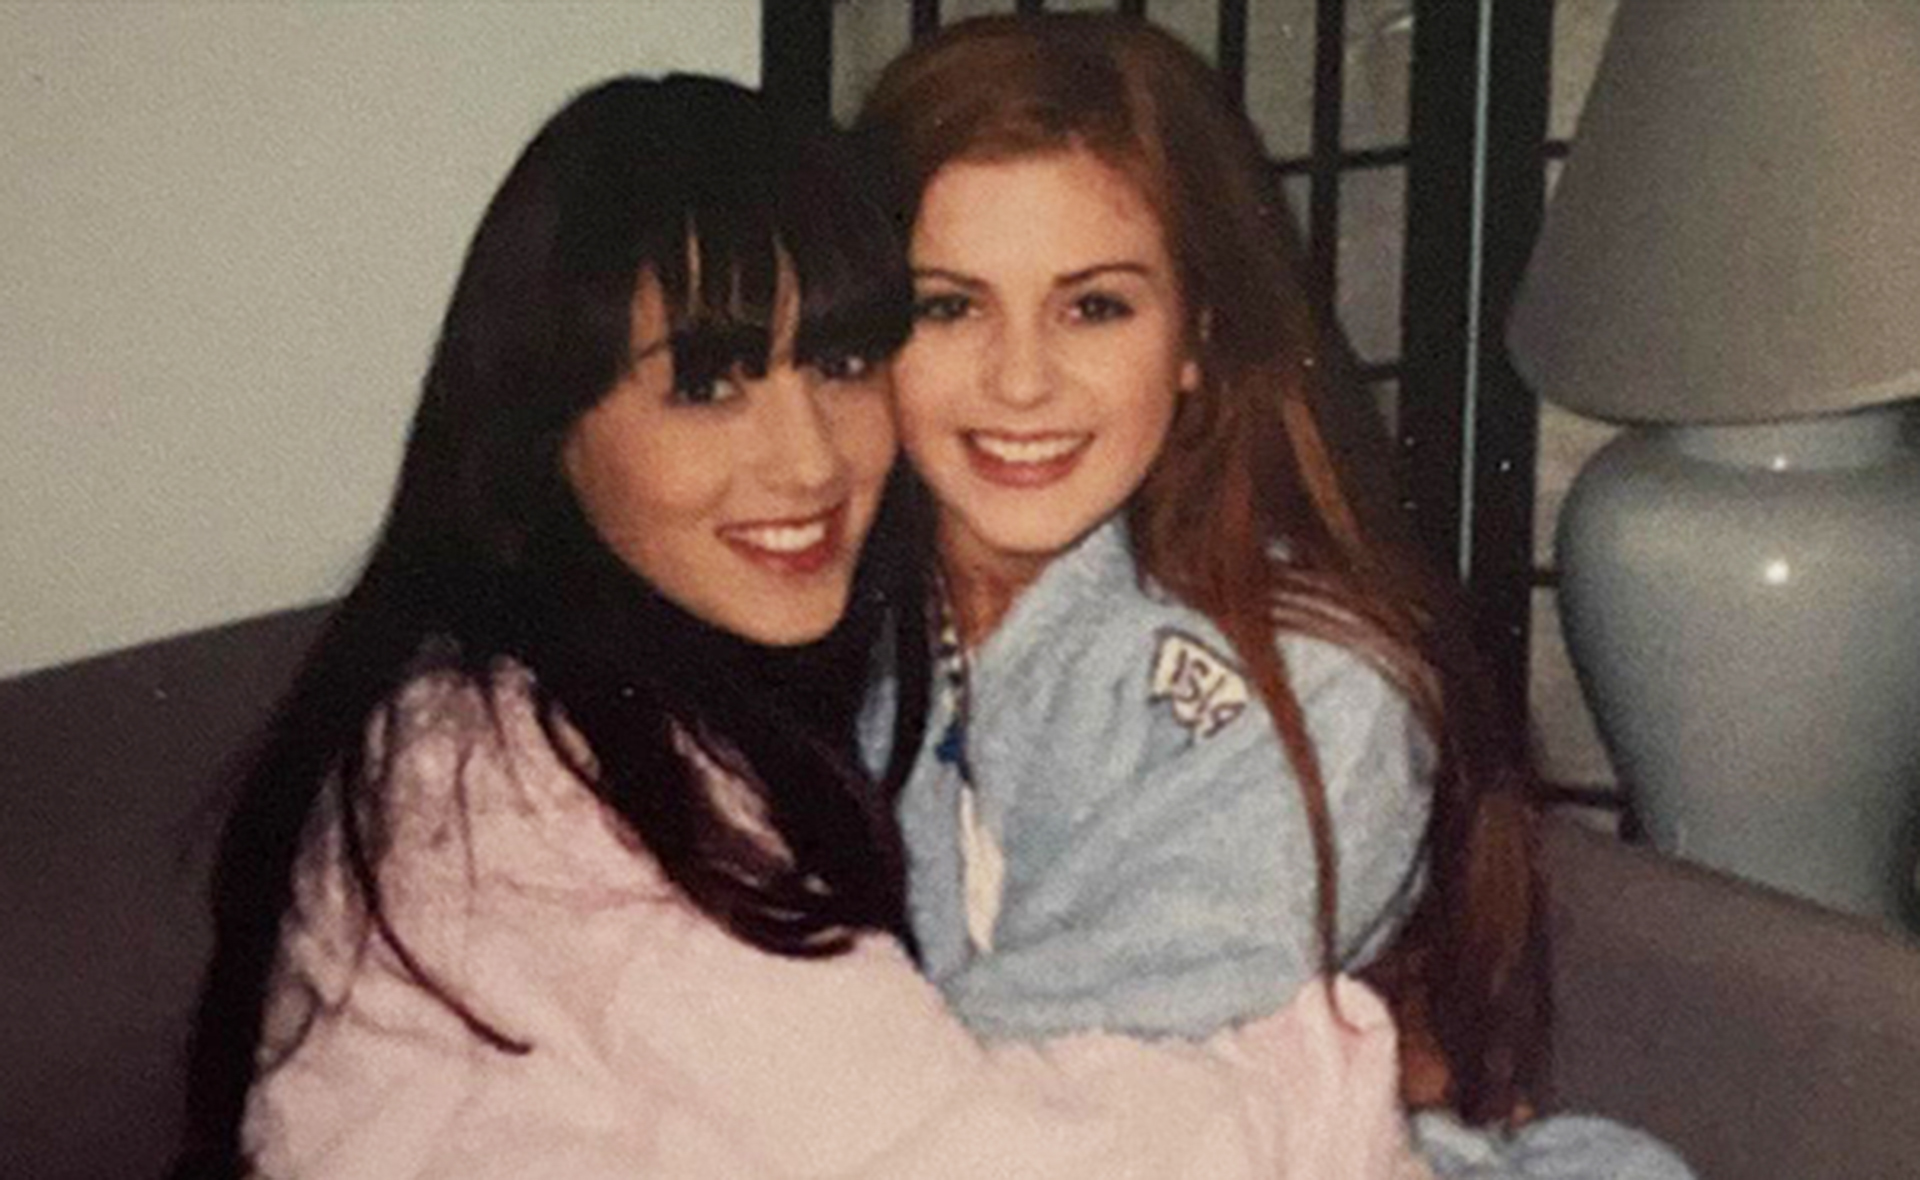 Home & Away’s Laura Vazquez stuns fans with an incredible throwback featuring Isla Fisher